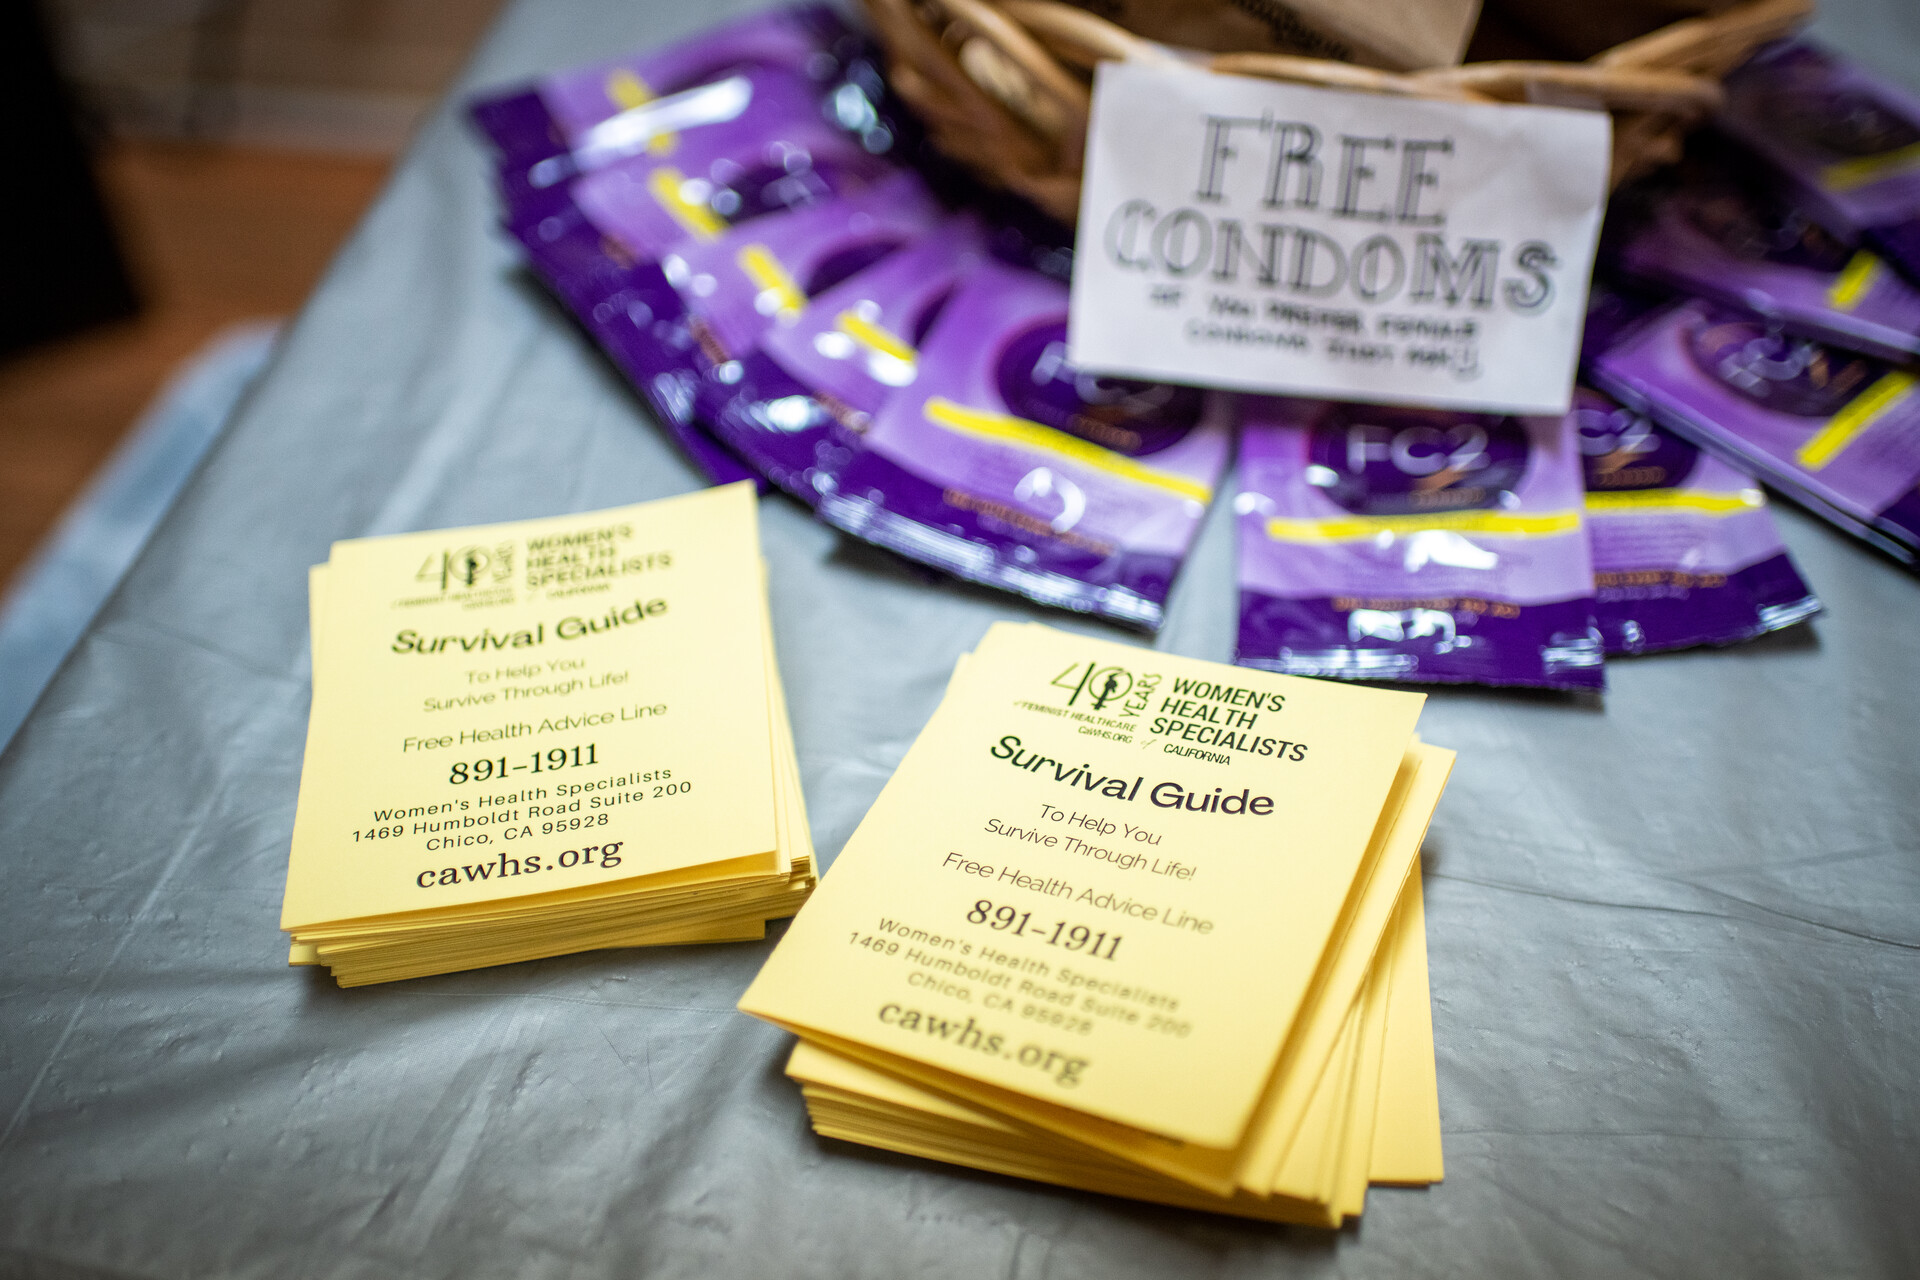 Yellow pieces of paper that read "survival guide" and a white sign that reads "free condoms" with a purple wrappers sits on a table.